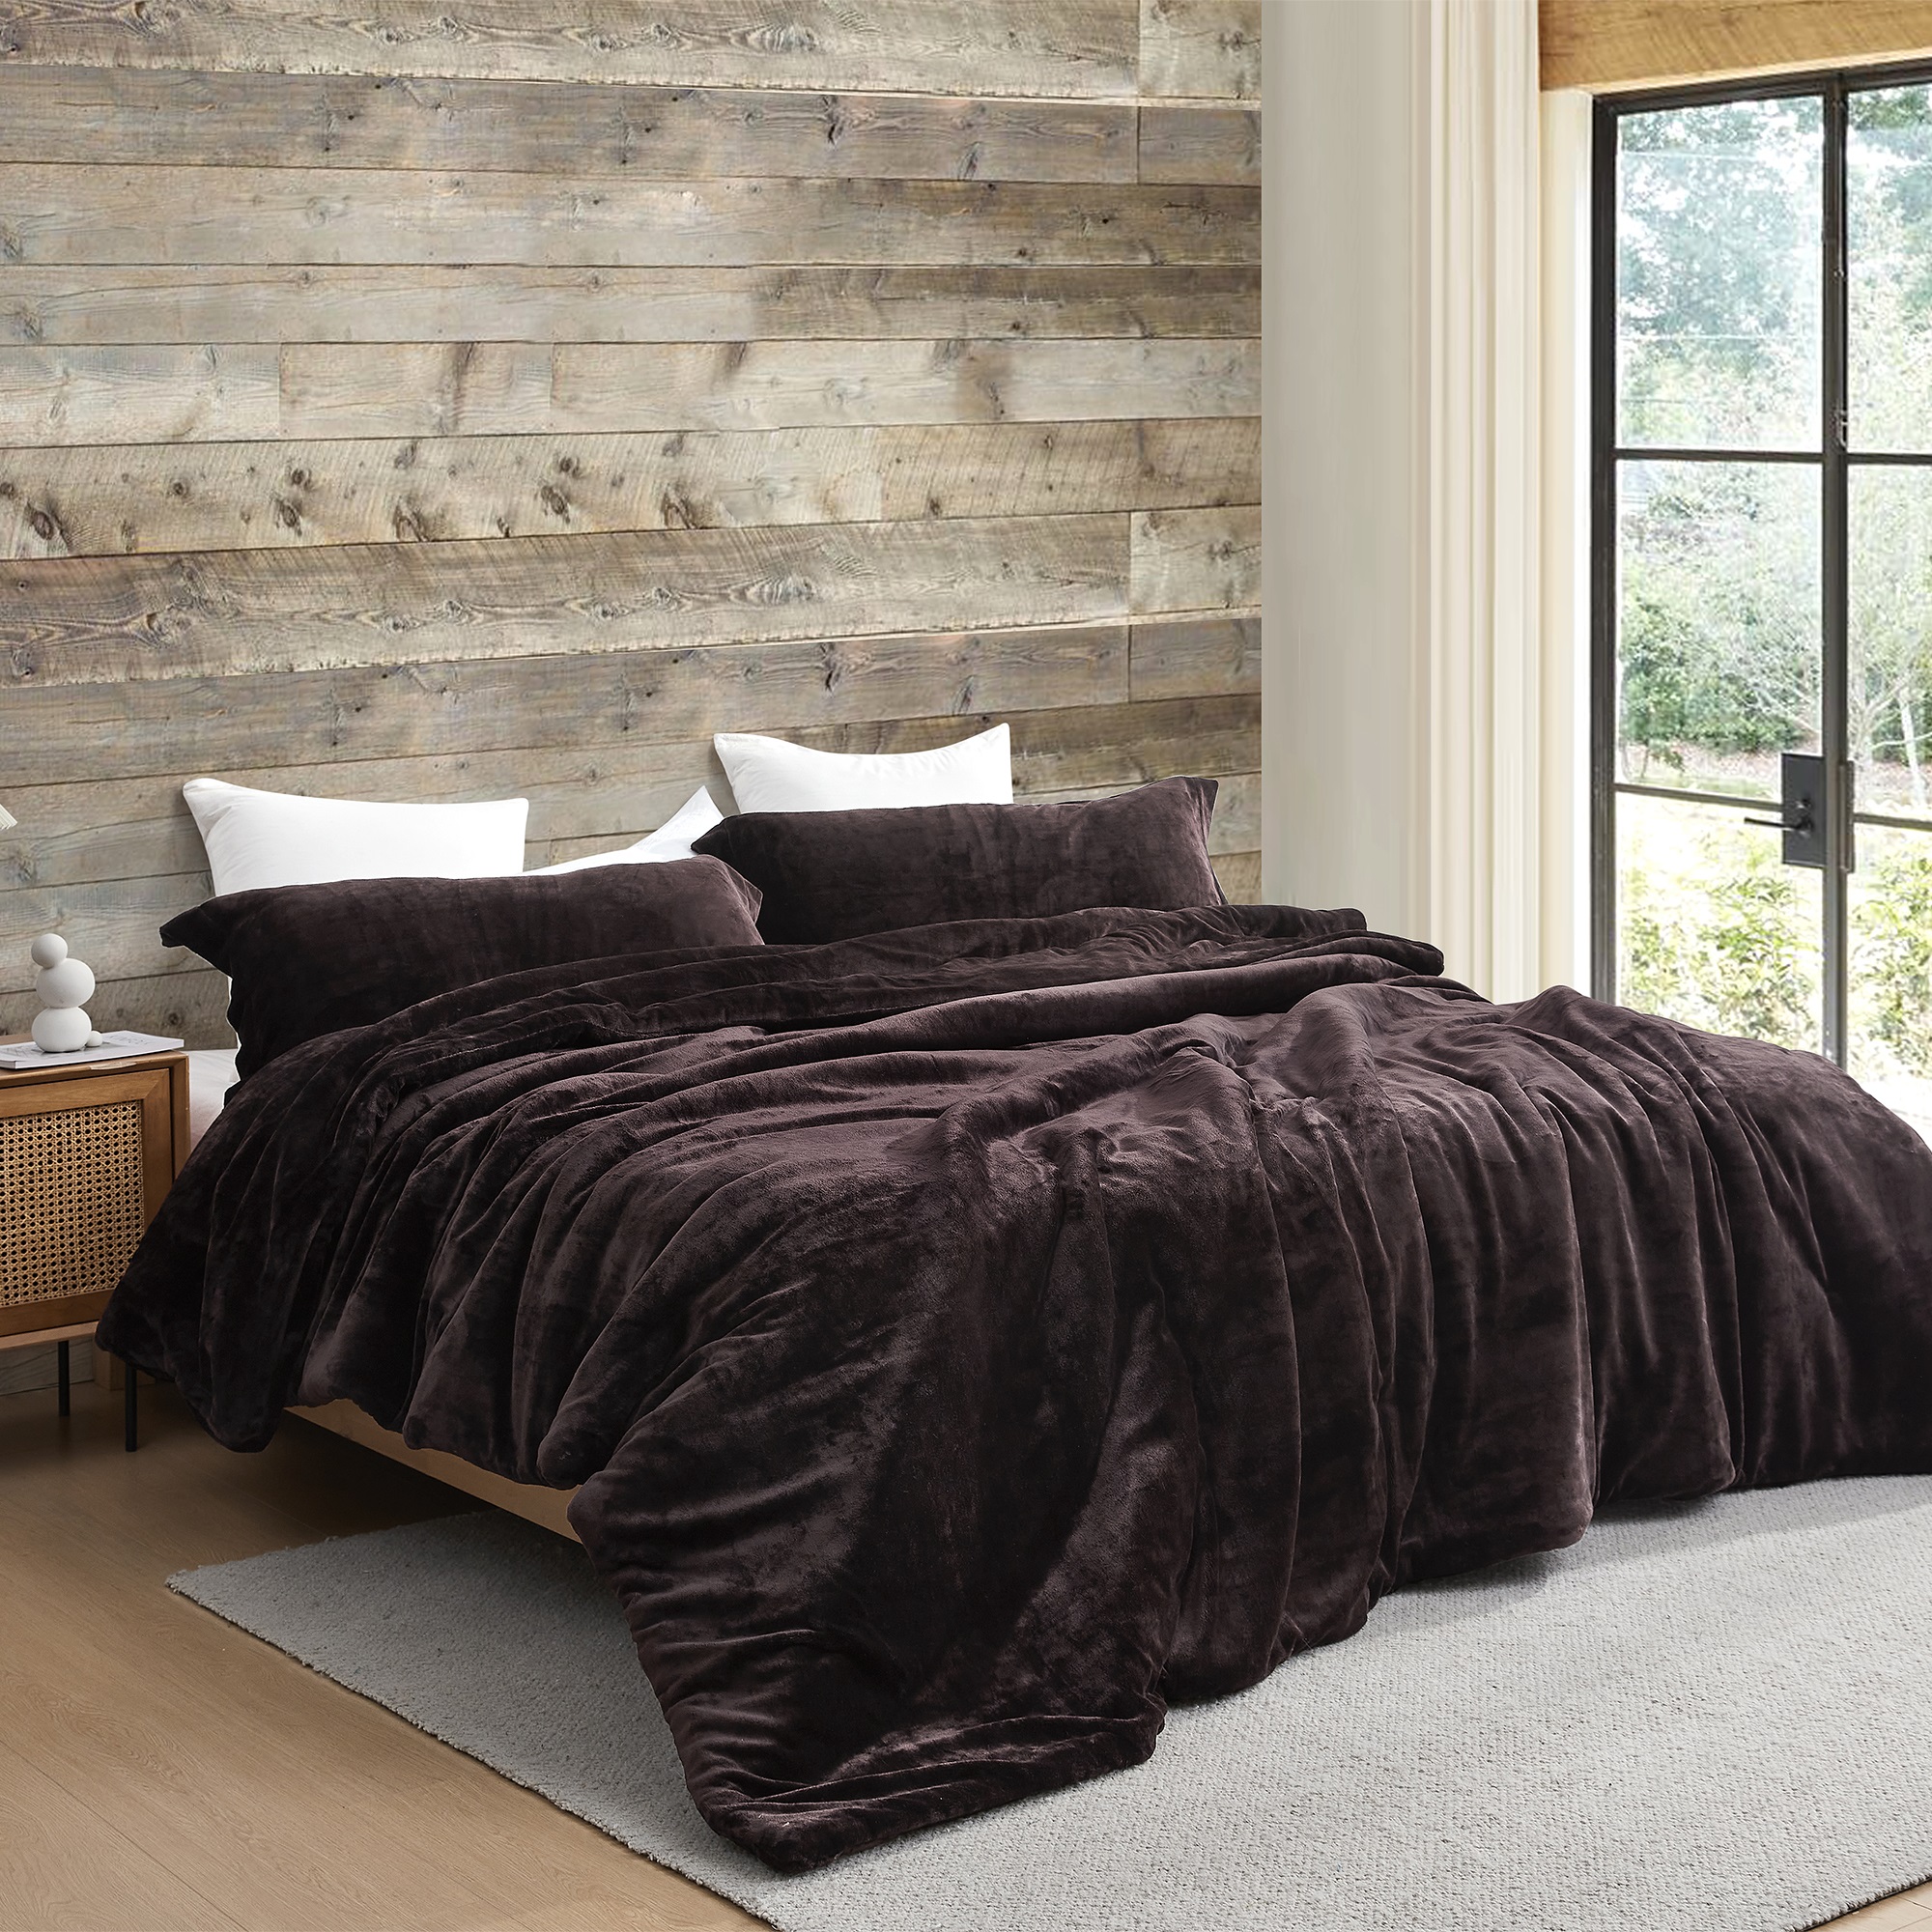 Easy to Match Neutral Brown Queen Extra Large Plush Comforter Set